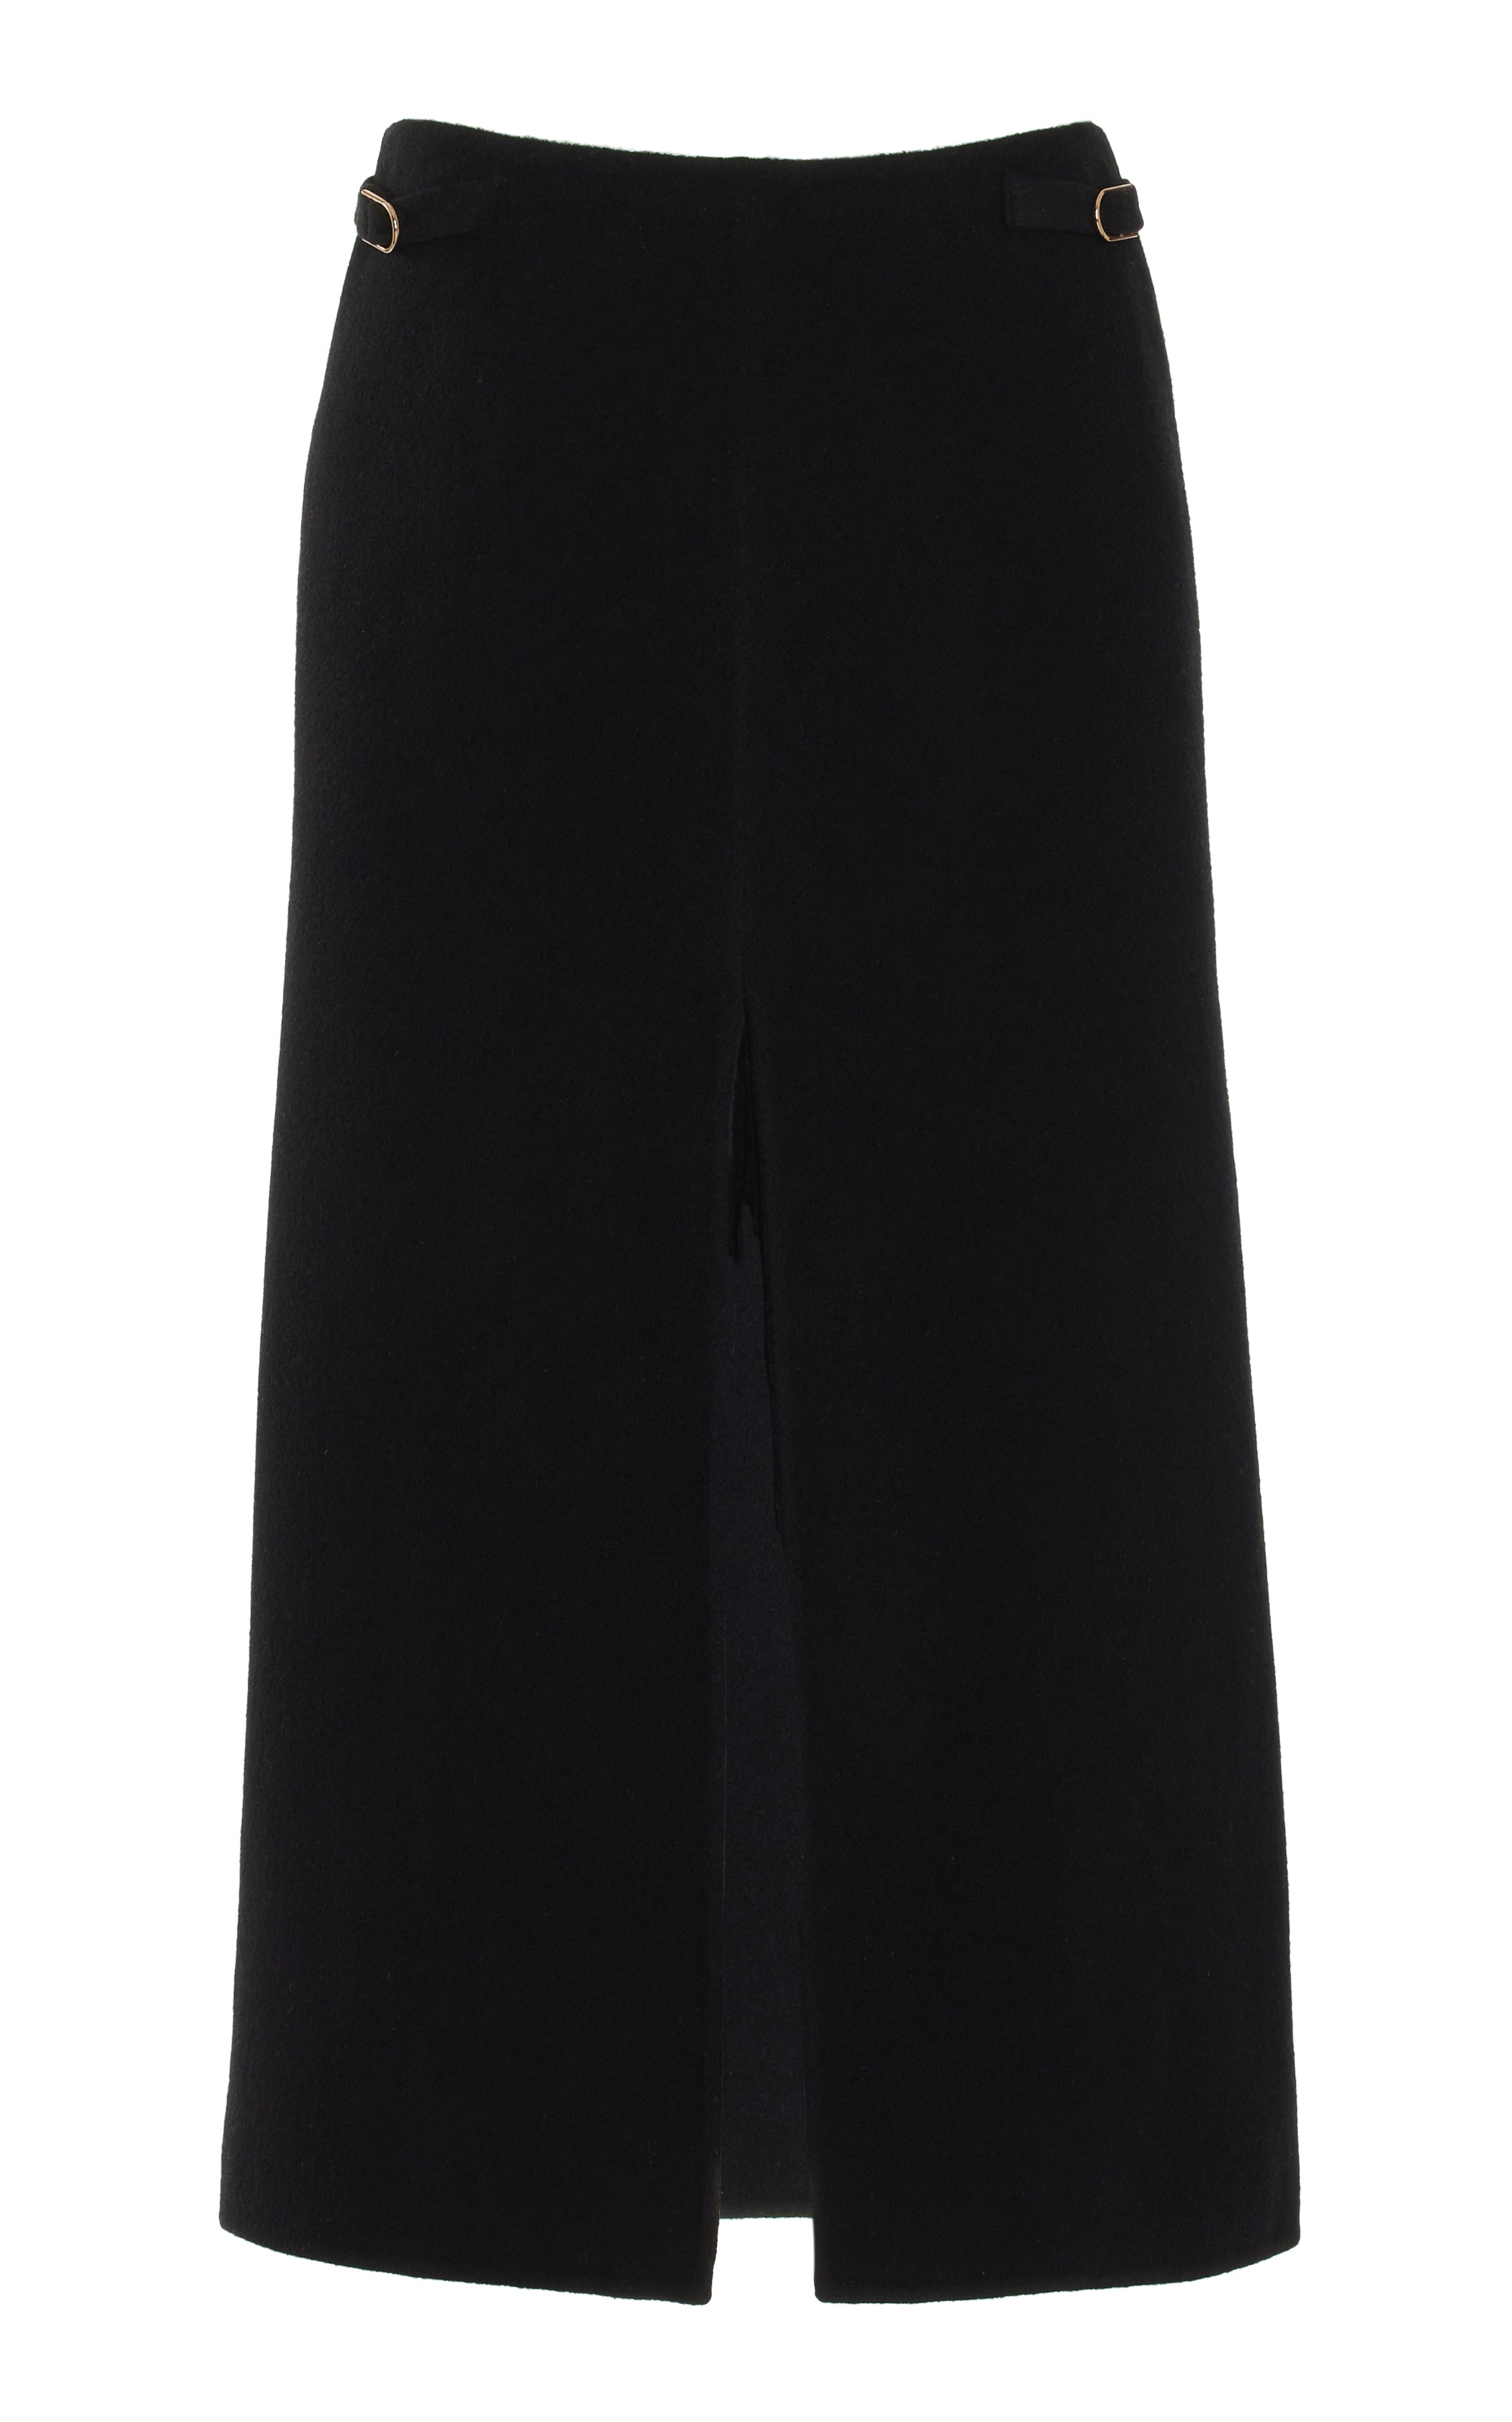 Morelos Skirt in Black Double-Face Recycled Cashmere - 1